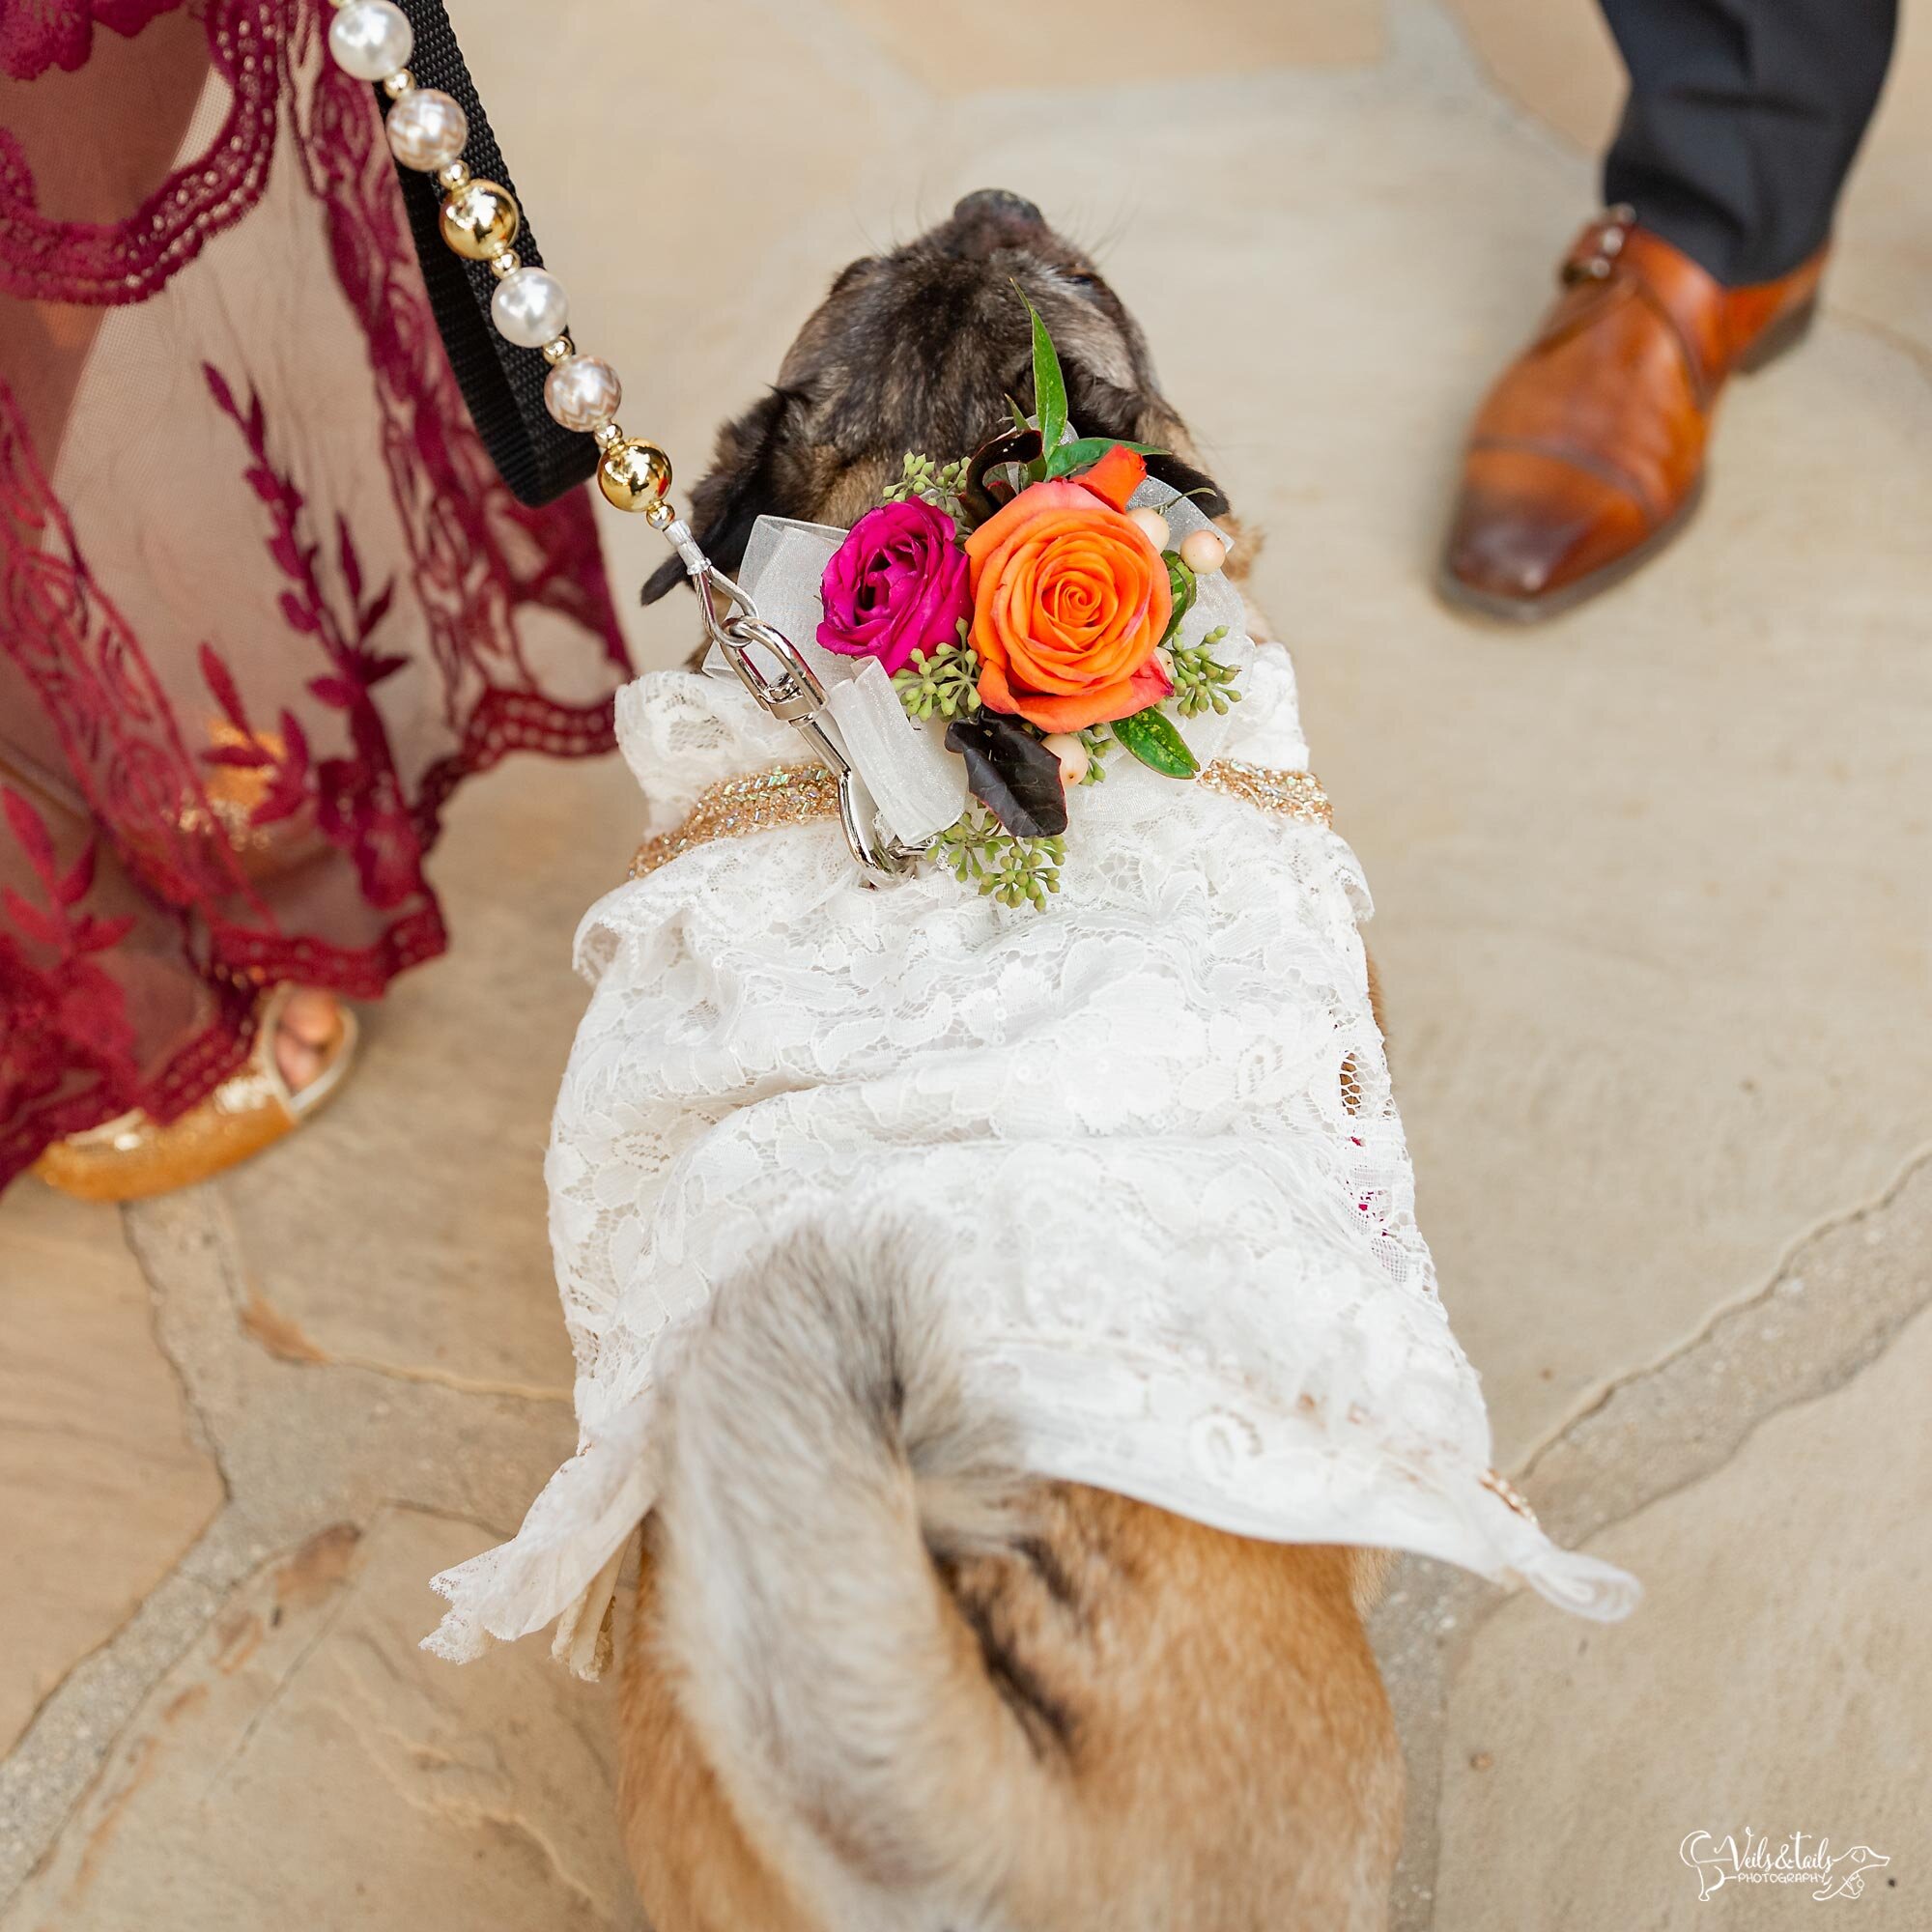 dress your dog for your wedding, wedding and dog photography